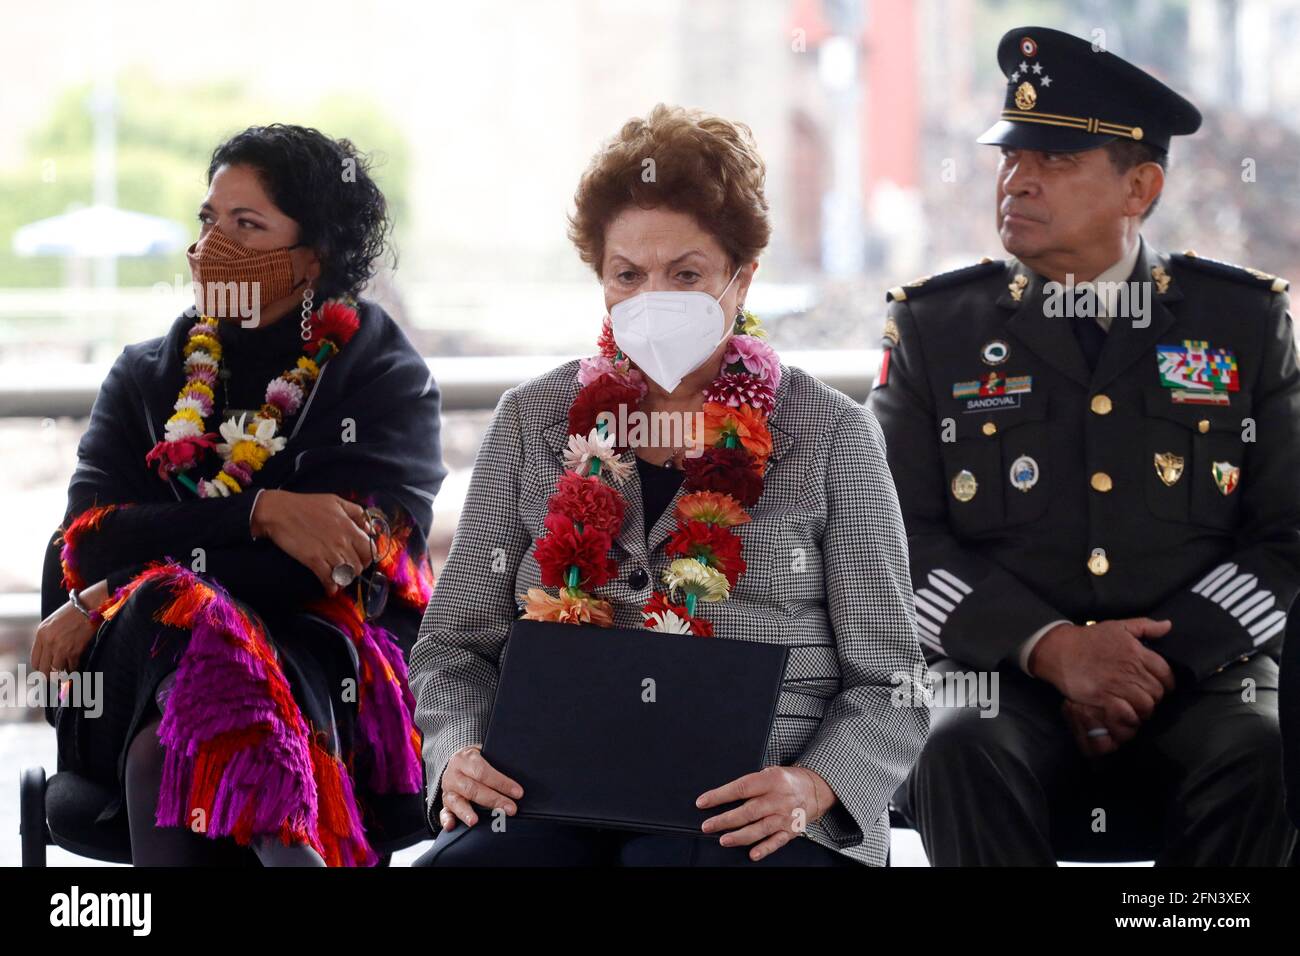 Mexico City, Mexico. 13th May, 2021. Former president of Brazil, Dilma Rousseff, during ceremony for the 700 years of the founding of Tenochtitlan at the Museo del Templo Mayor on May 13, 2021 in Mexico City, Mexico. Photo by Luis Barron/Eyepix/ABACAPRESS.COM Credit: Abaca Press/Alamy Live News Stock Photo